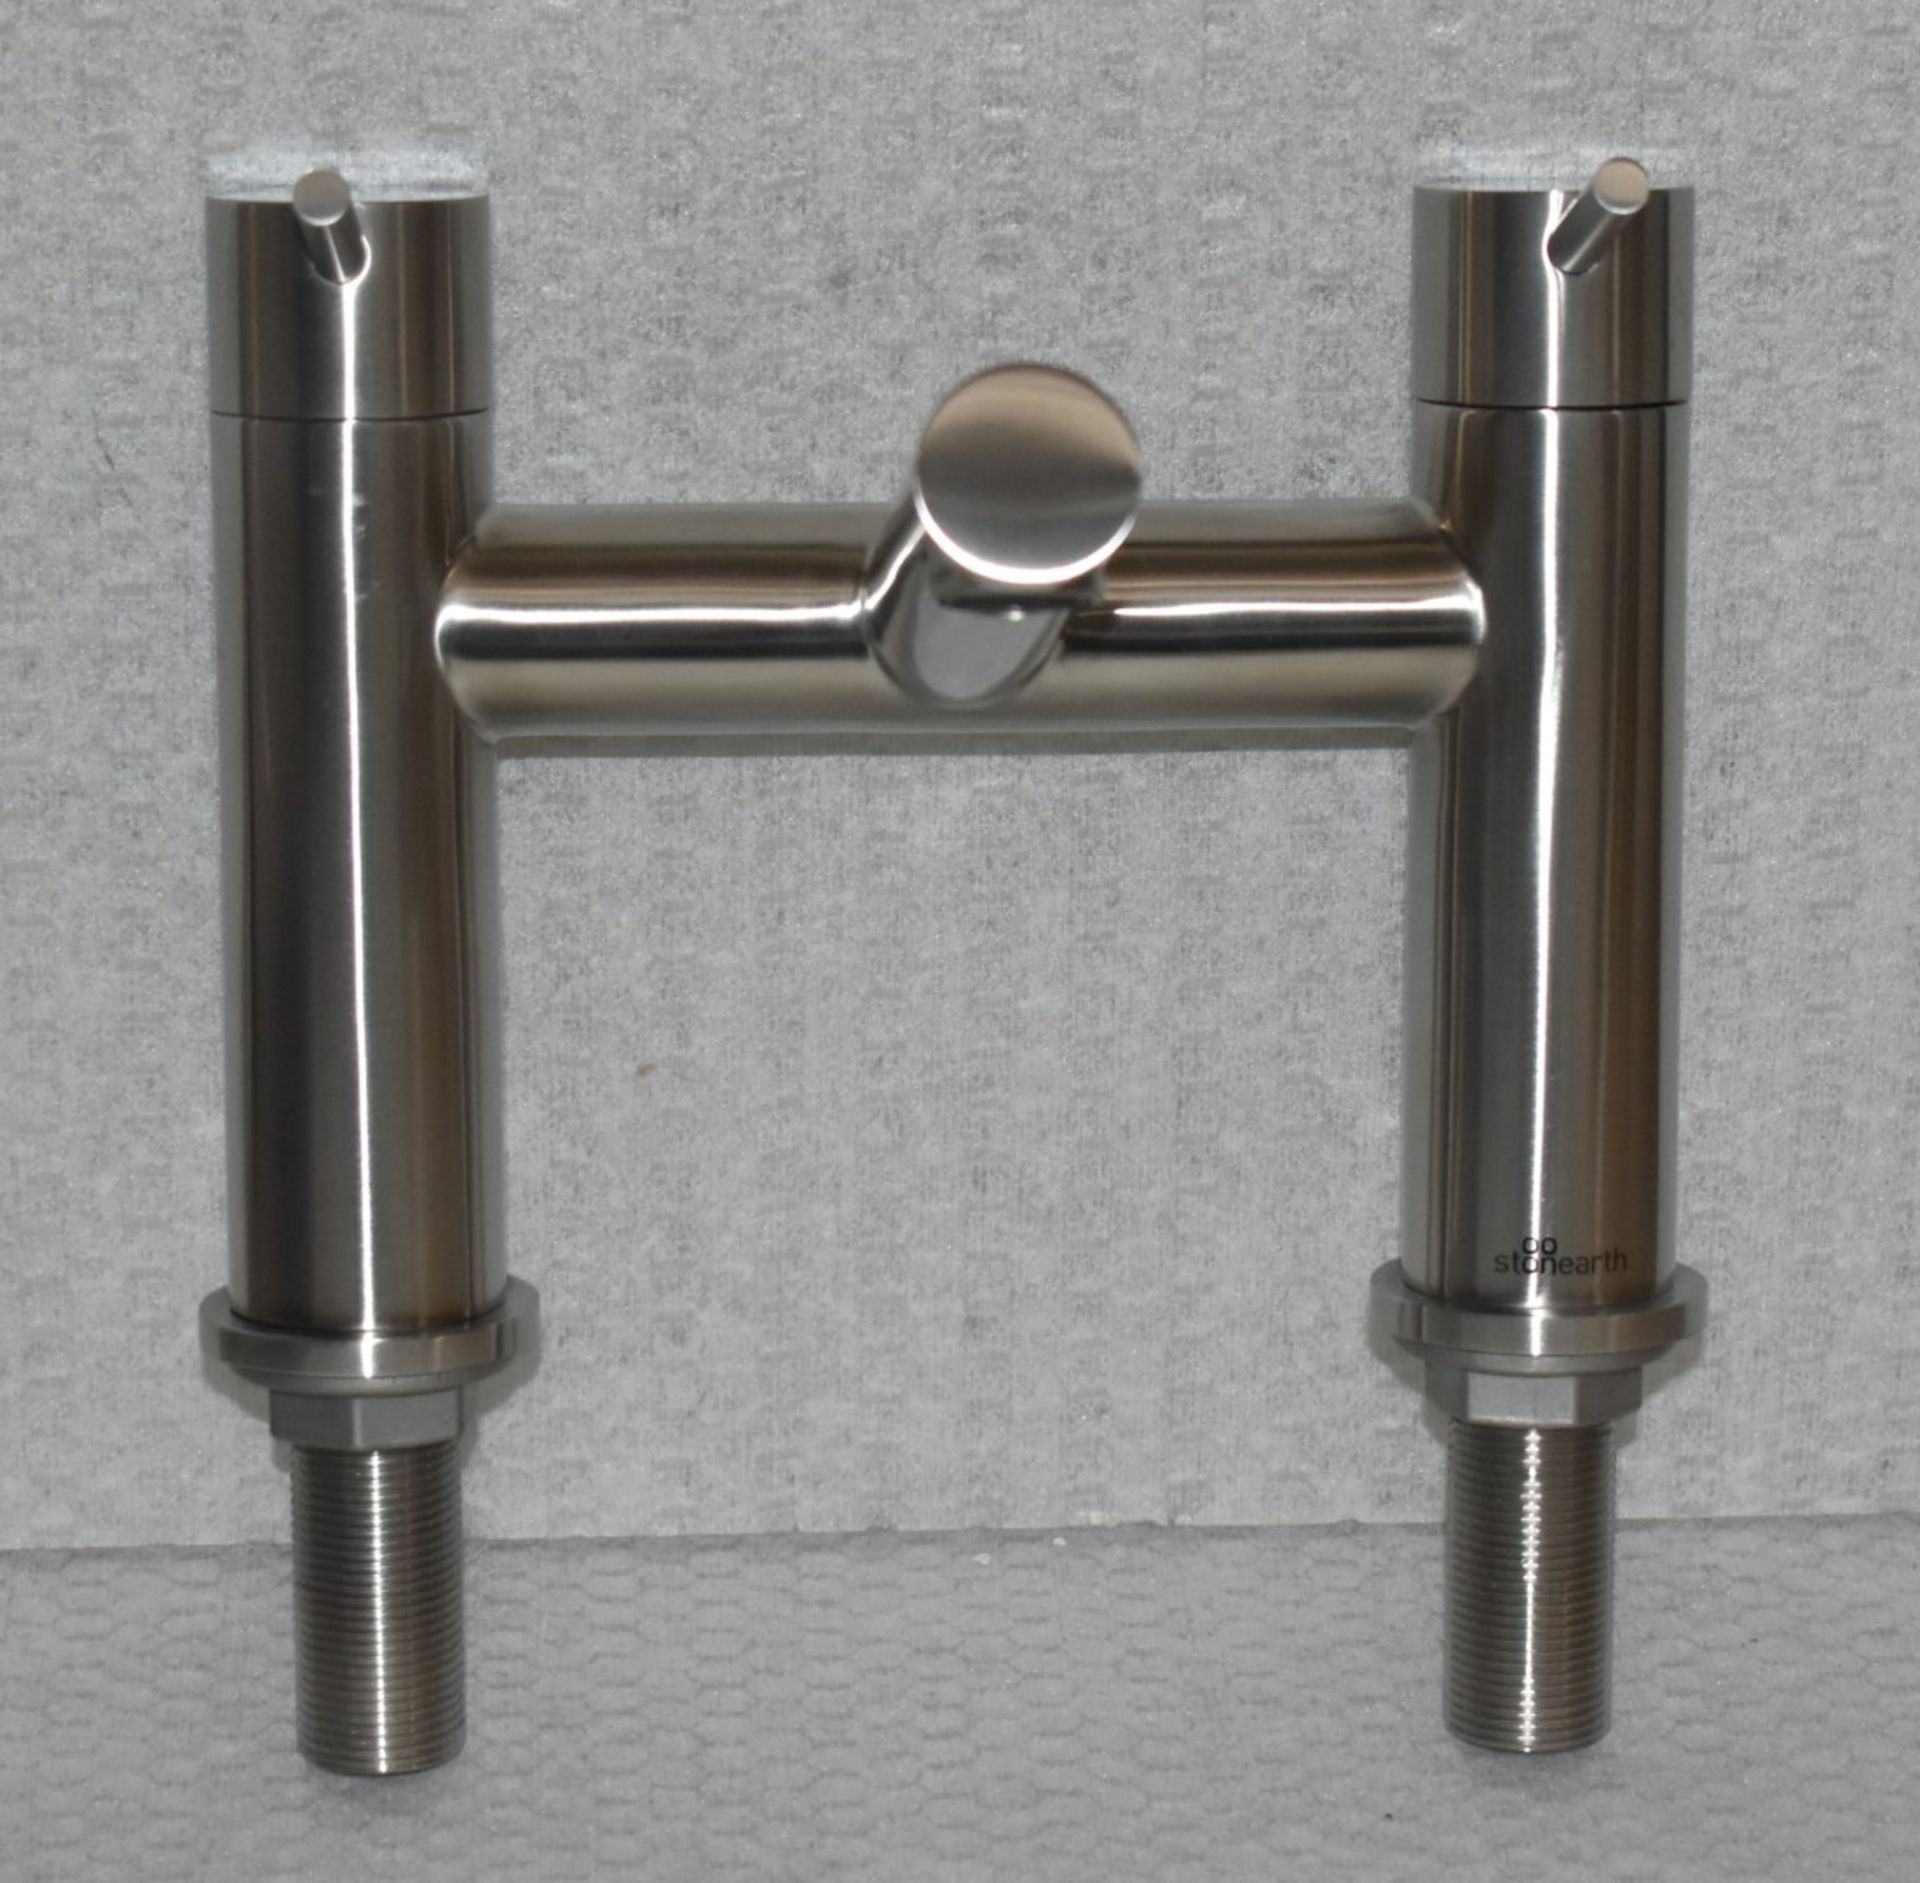 1 x Stonearth 'Hali' Stainless Steel Bath Filler Mixer Tap - Brand New & Boxed - RRP £340 - Image 10 of 10